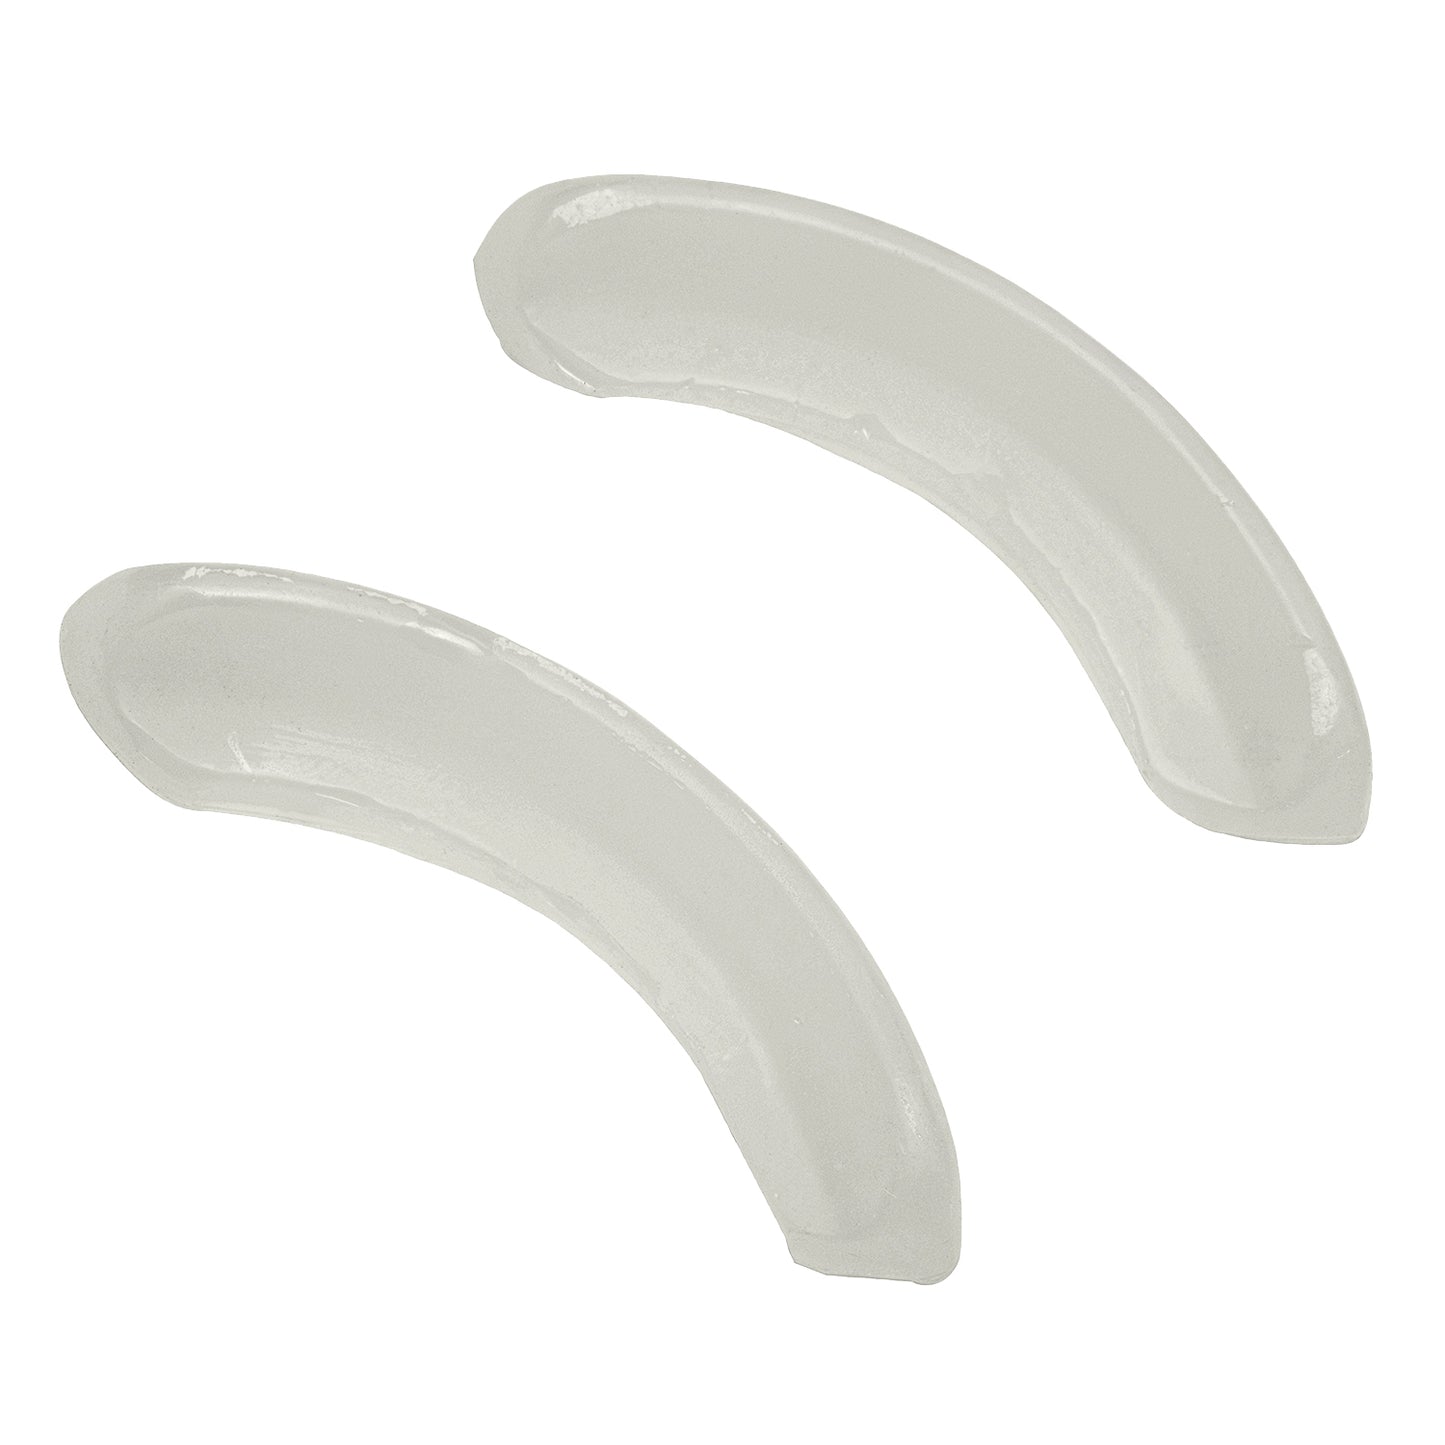 Pair of Replacement Silicone Molding Bars for Removable Gold Teeth Grillz (SKU: SLK102)